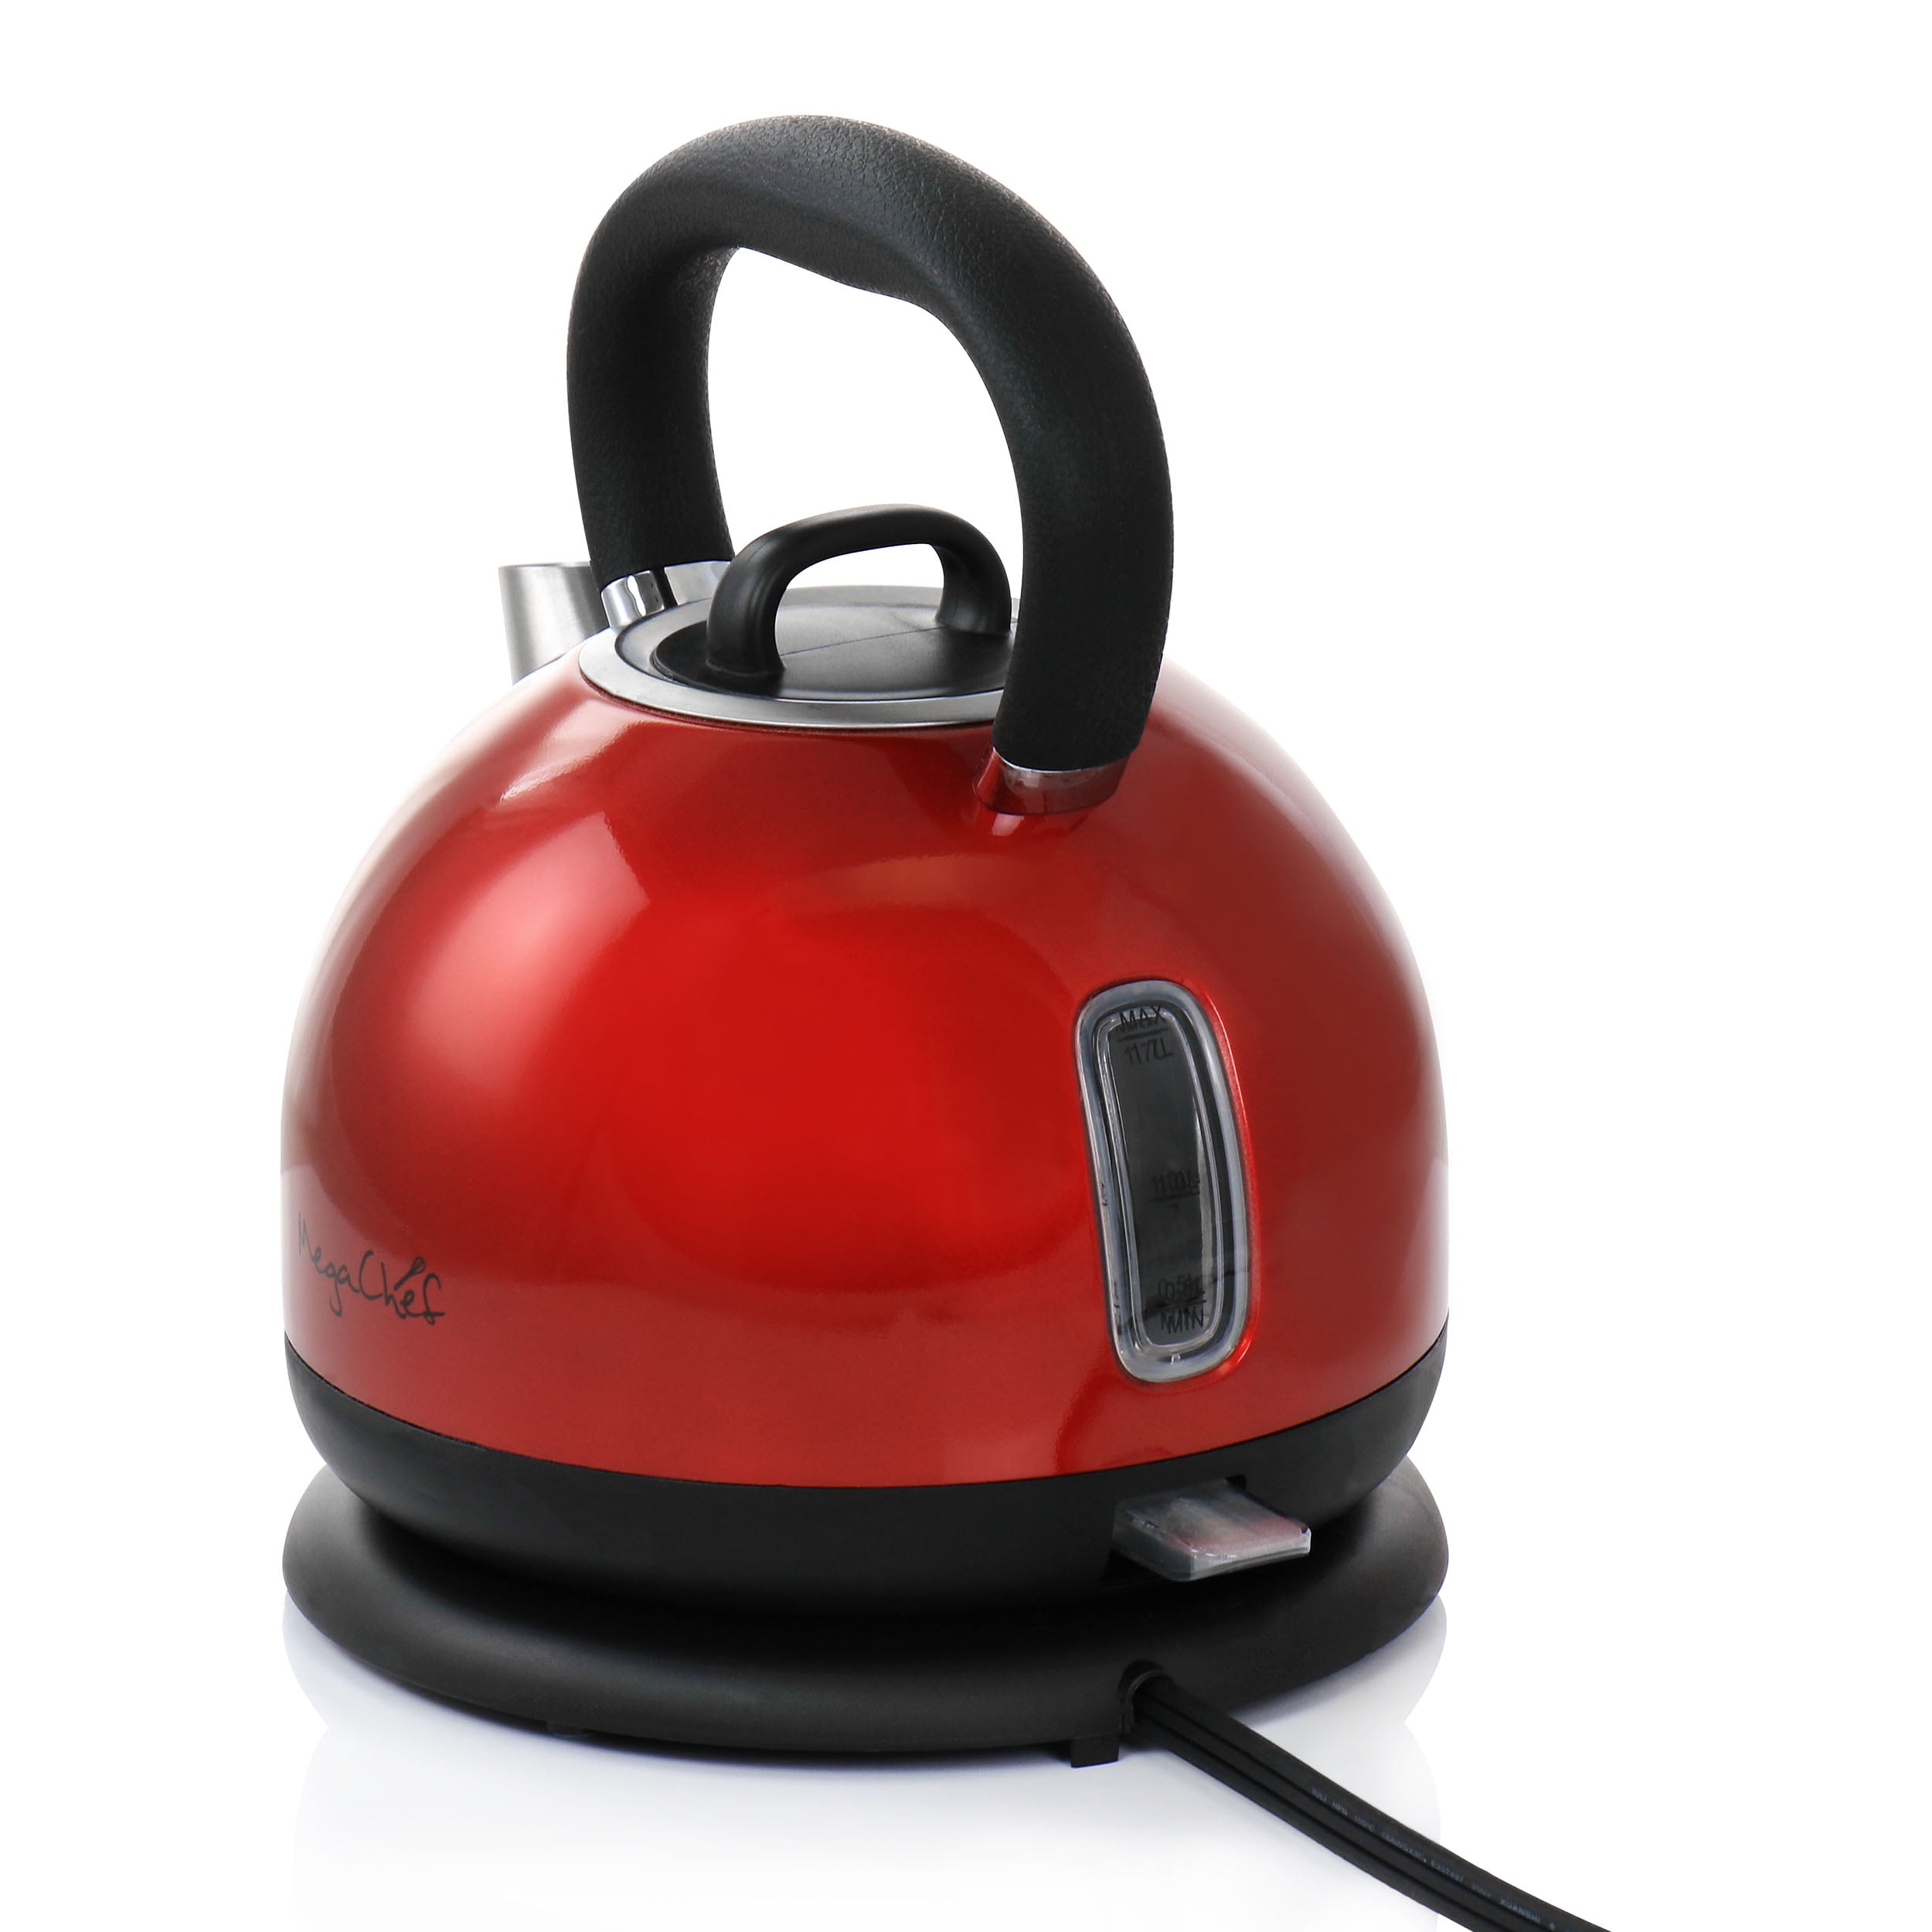 MegaChef 7 Cup Electric Tea Kettle and 2 Slice Toaster Combo in Red